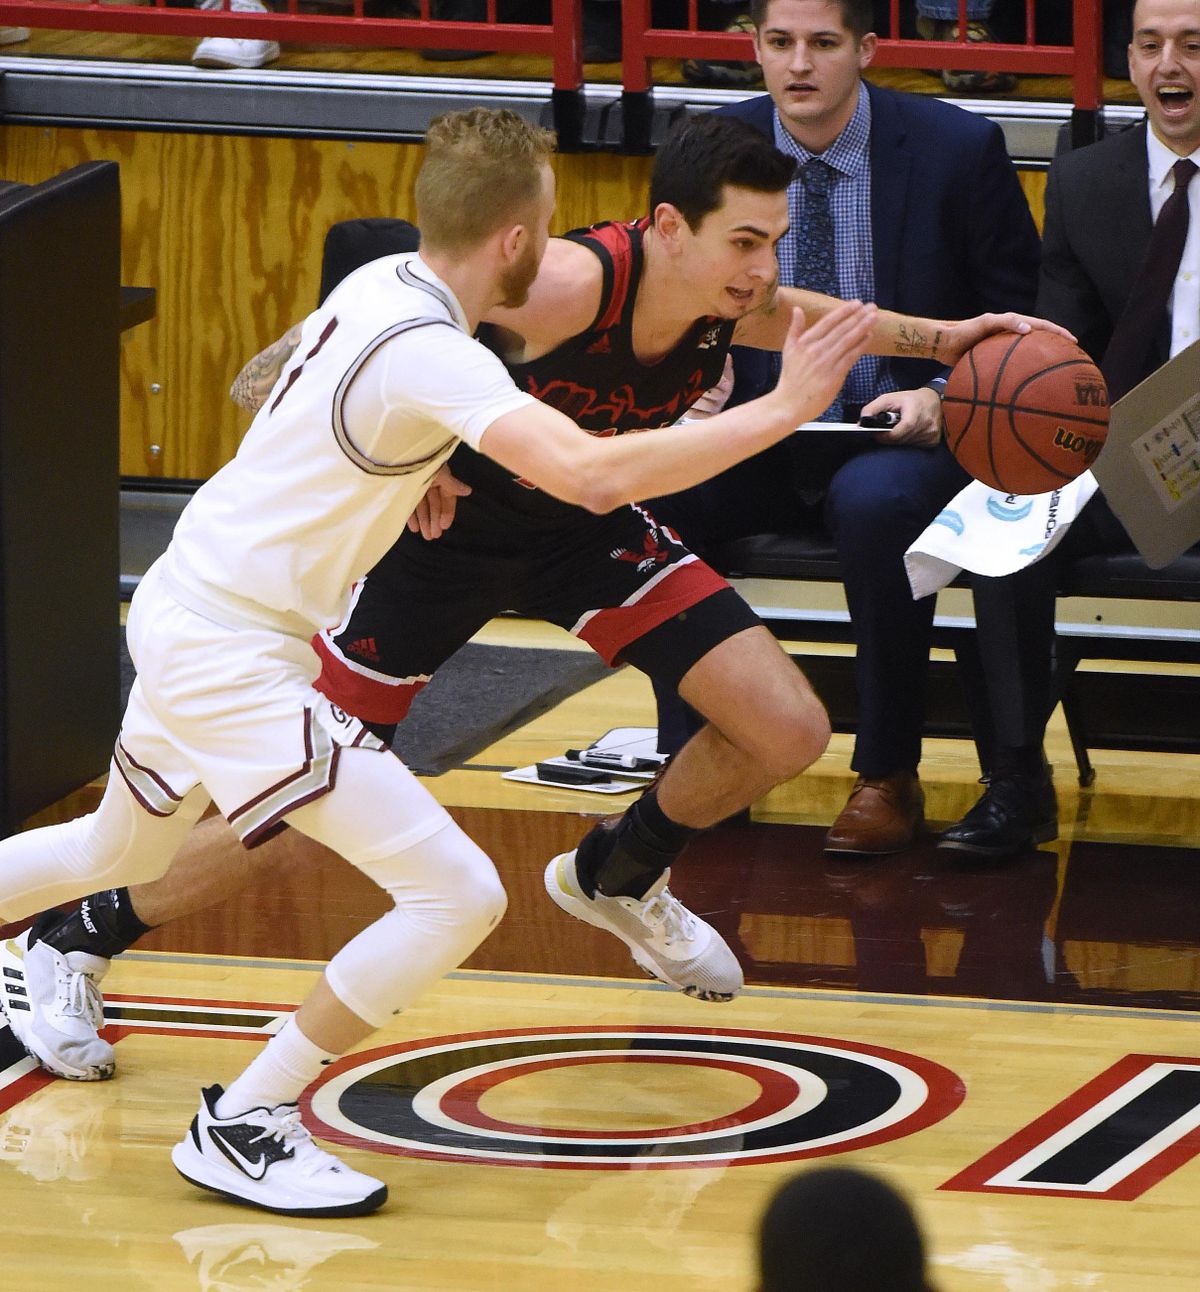 Eastern Washington guard Jacob Davison (10) dribbles the ball downcourt as Montana guard Timmy Falls (1) gives chase during the first half of a college basketball game, Thurs., Jan. 9, 2020, on Reese Court in Cheney, Wash. (Colin Mulvany / The Spokesman-Review)